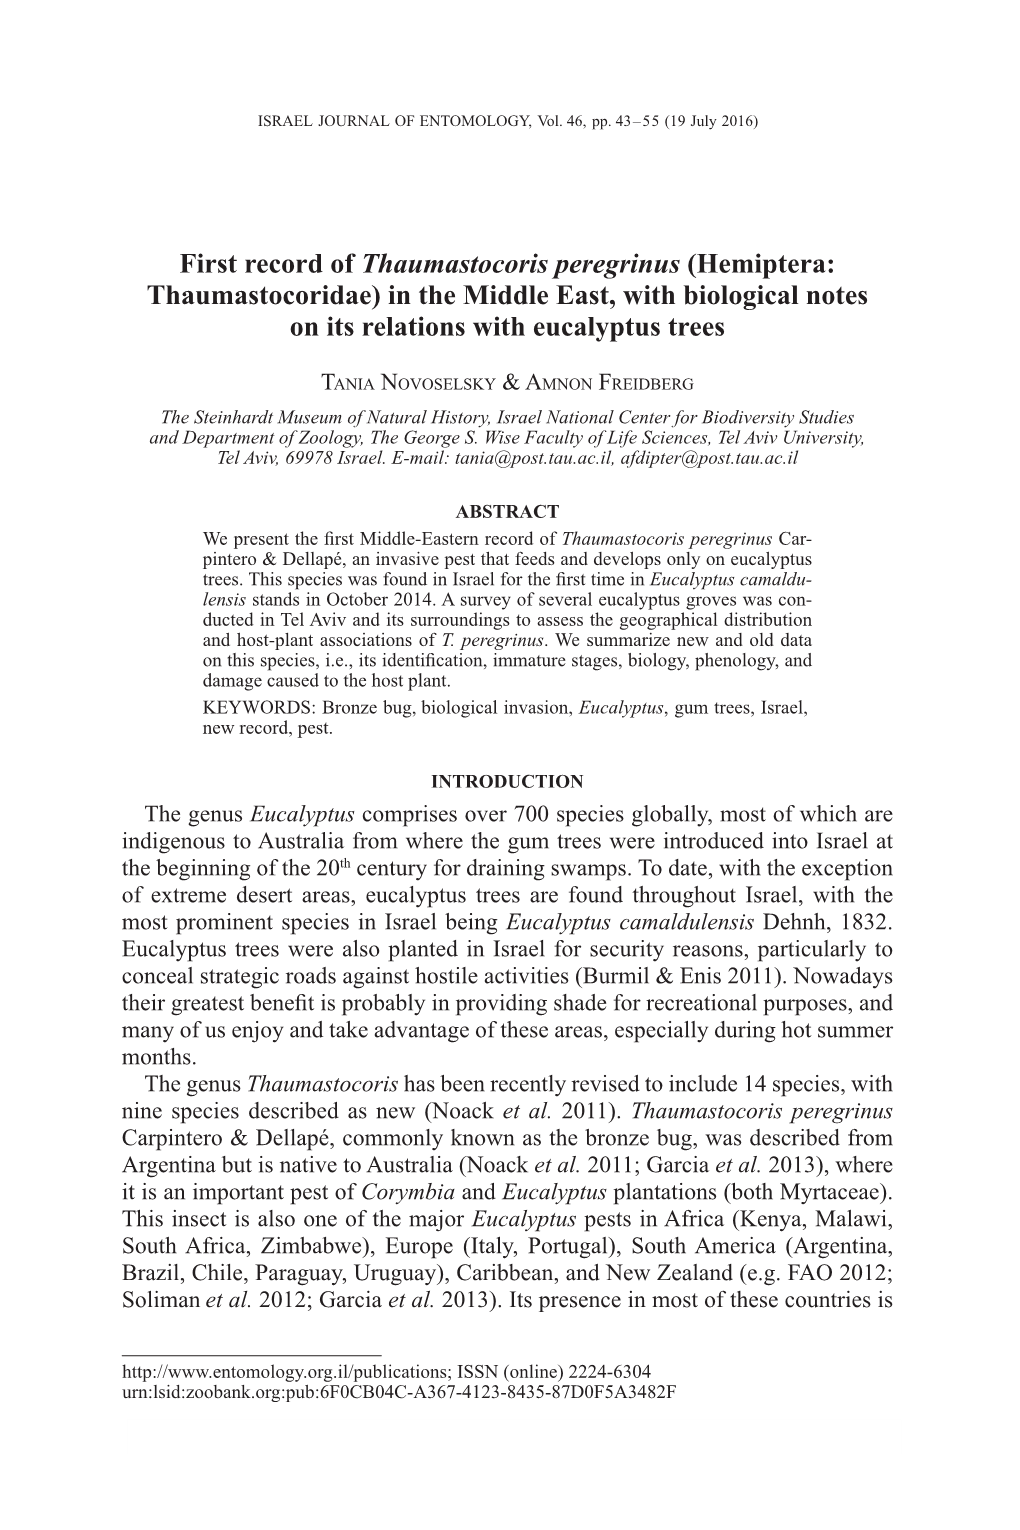 First Record of Thaumastocoris Peregrinus (Hemiptera: Thaumastocoridae) in the Middle East, with Biological Notes on Its Relations with Eucalyptus Trees